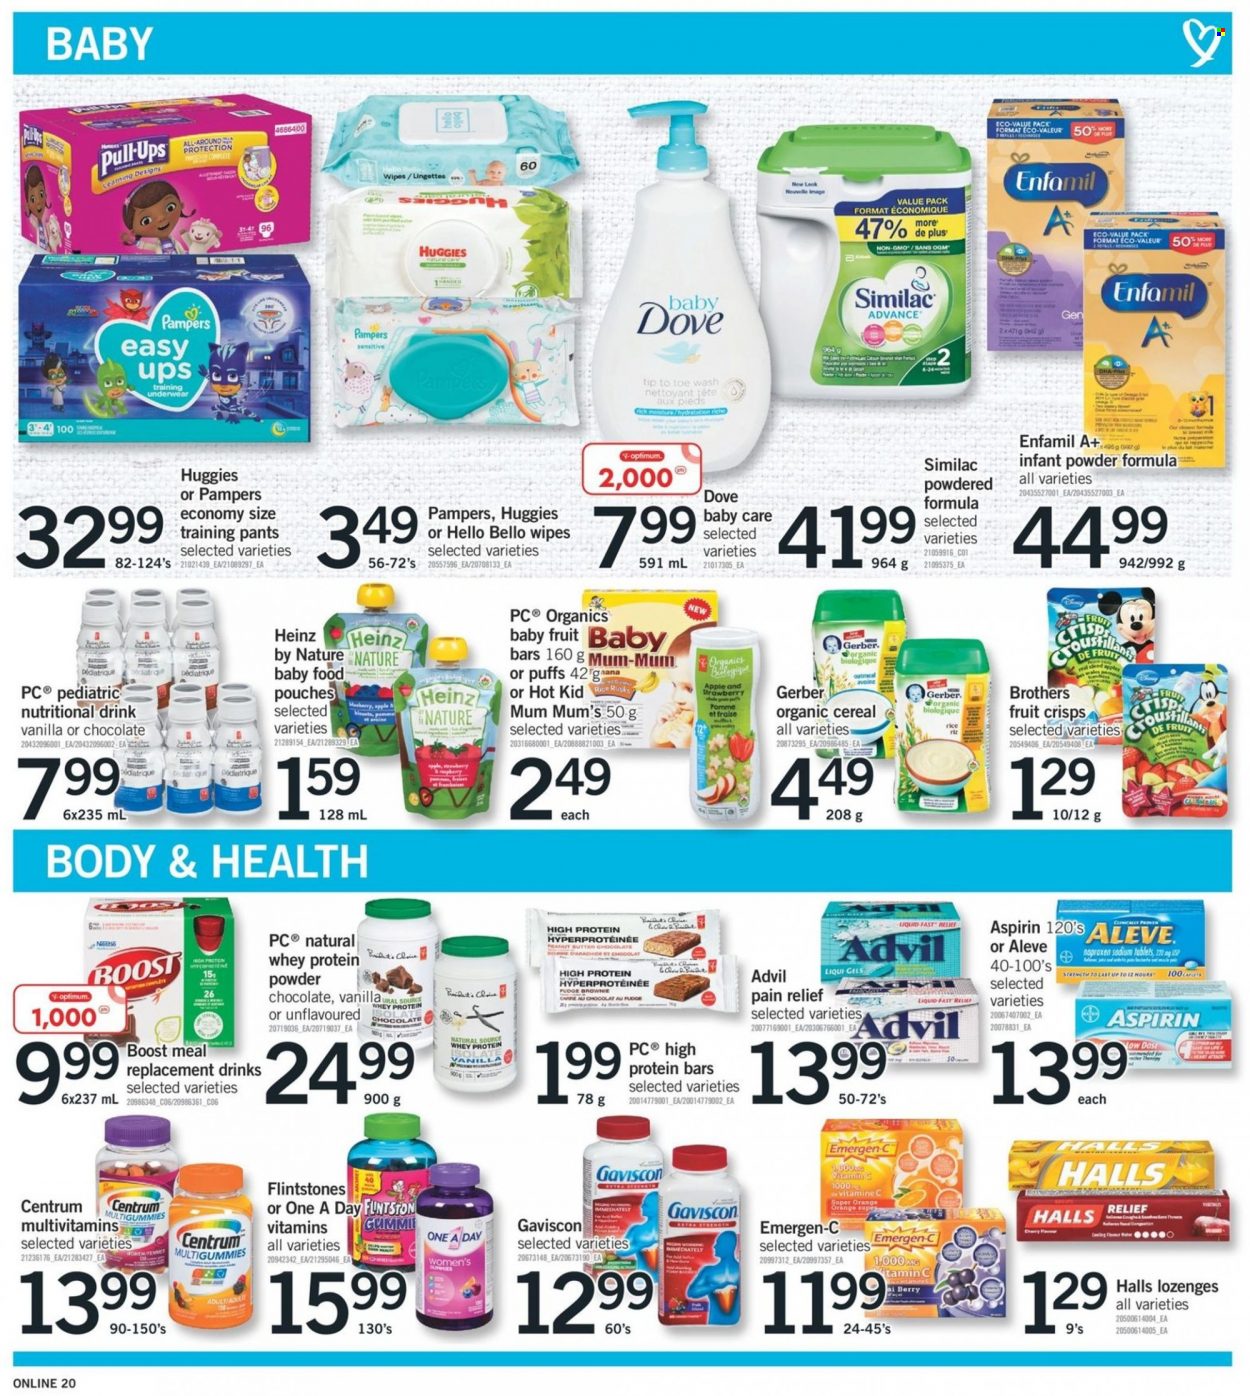 thumbnail - Fortinos Flyer - November 25, 2021 - December 01, 2021 - Sales products - puffs, brownies, Halls, Gerber, oatmeal, powder chocolate, Heinz, cereals, protein bar, rice, Boost, Ron Pelicano, BROTHERS, Enfamil, Similac, wipes, pants, baby pants, Mum, pin, Optimum, underwear, pain relief, Aleve, multivitamin, Advil Rapid, Emergen-C, whey protein, Gaviscon, aspirin, Centrum, Dove, Huggies, Pampers, oranges. Page 19.